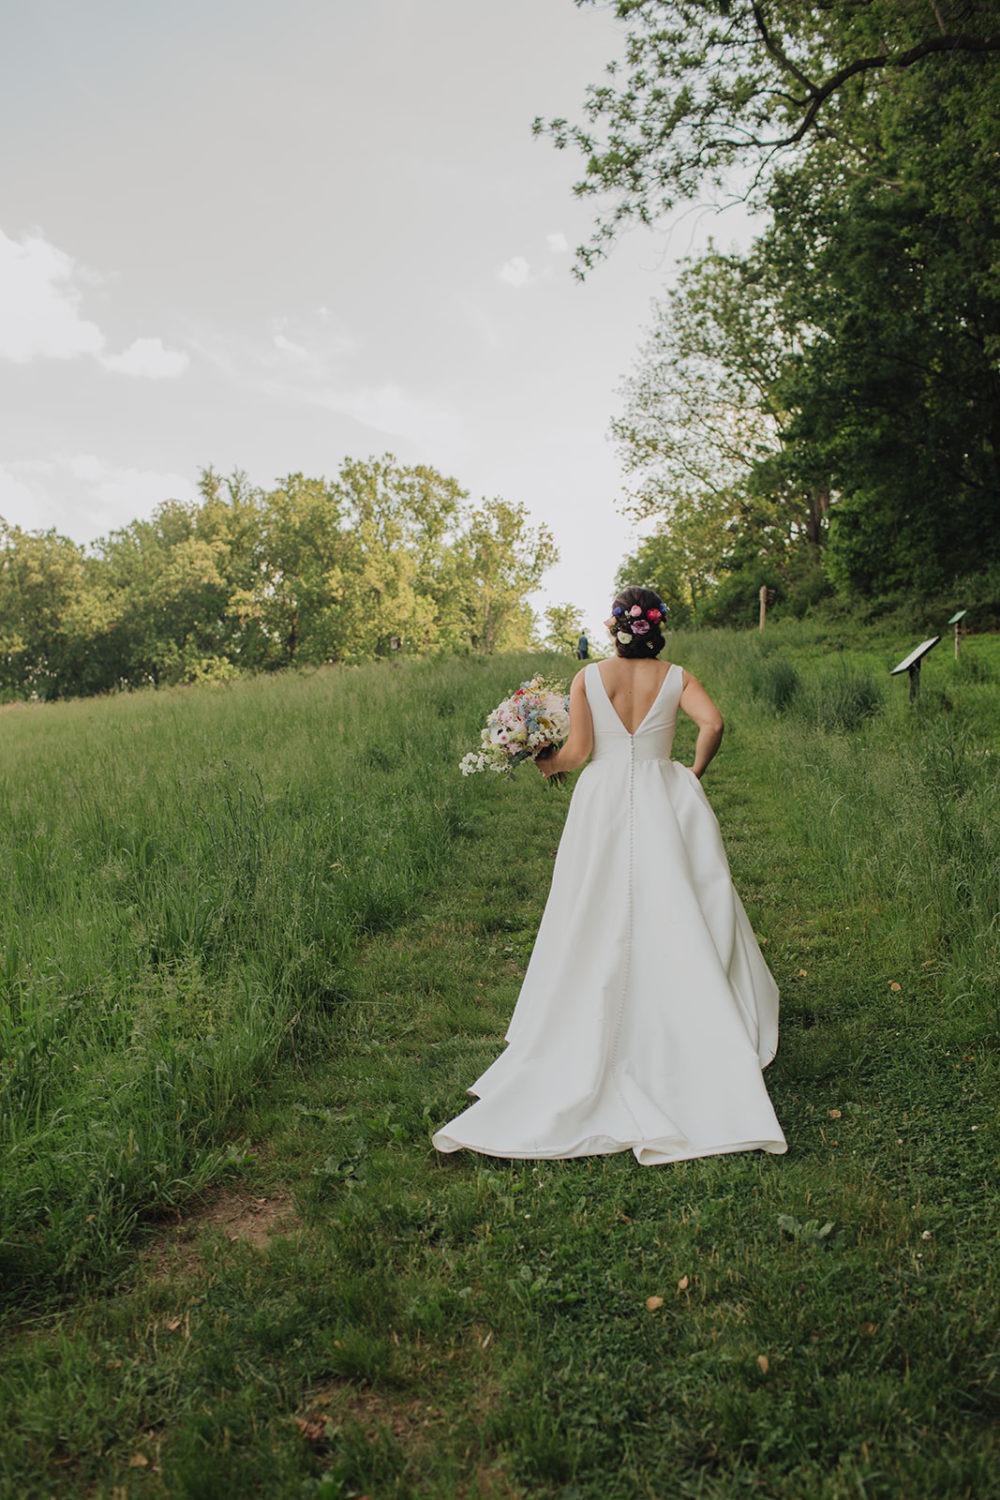 Bride walks up hill for first look at nature wedding venue